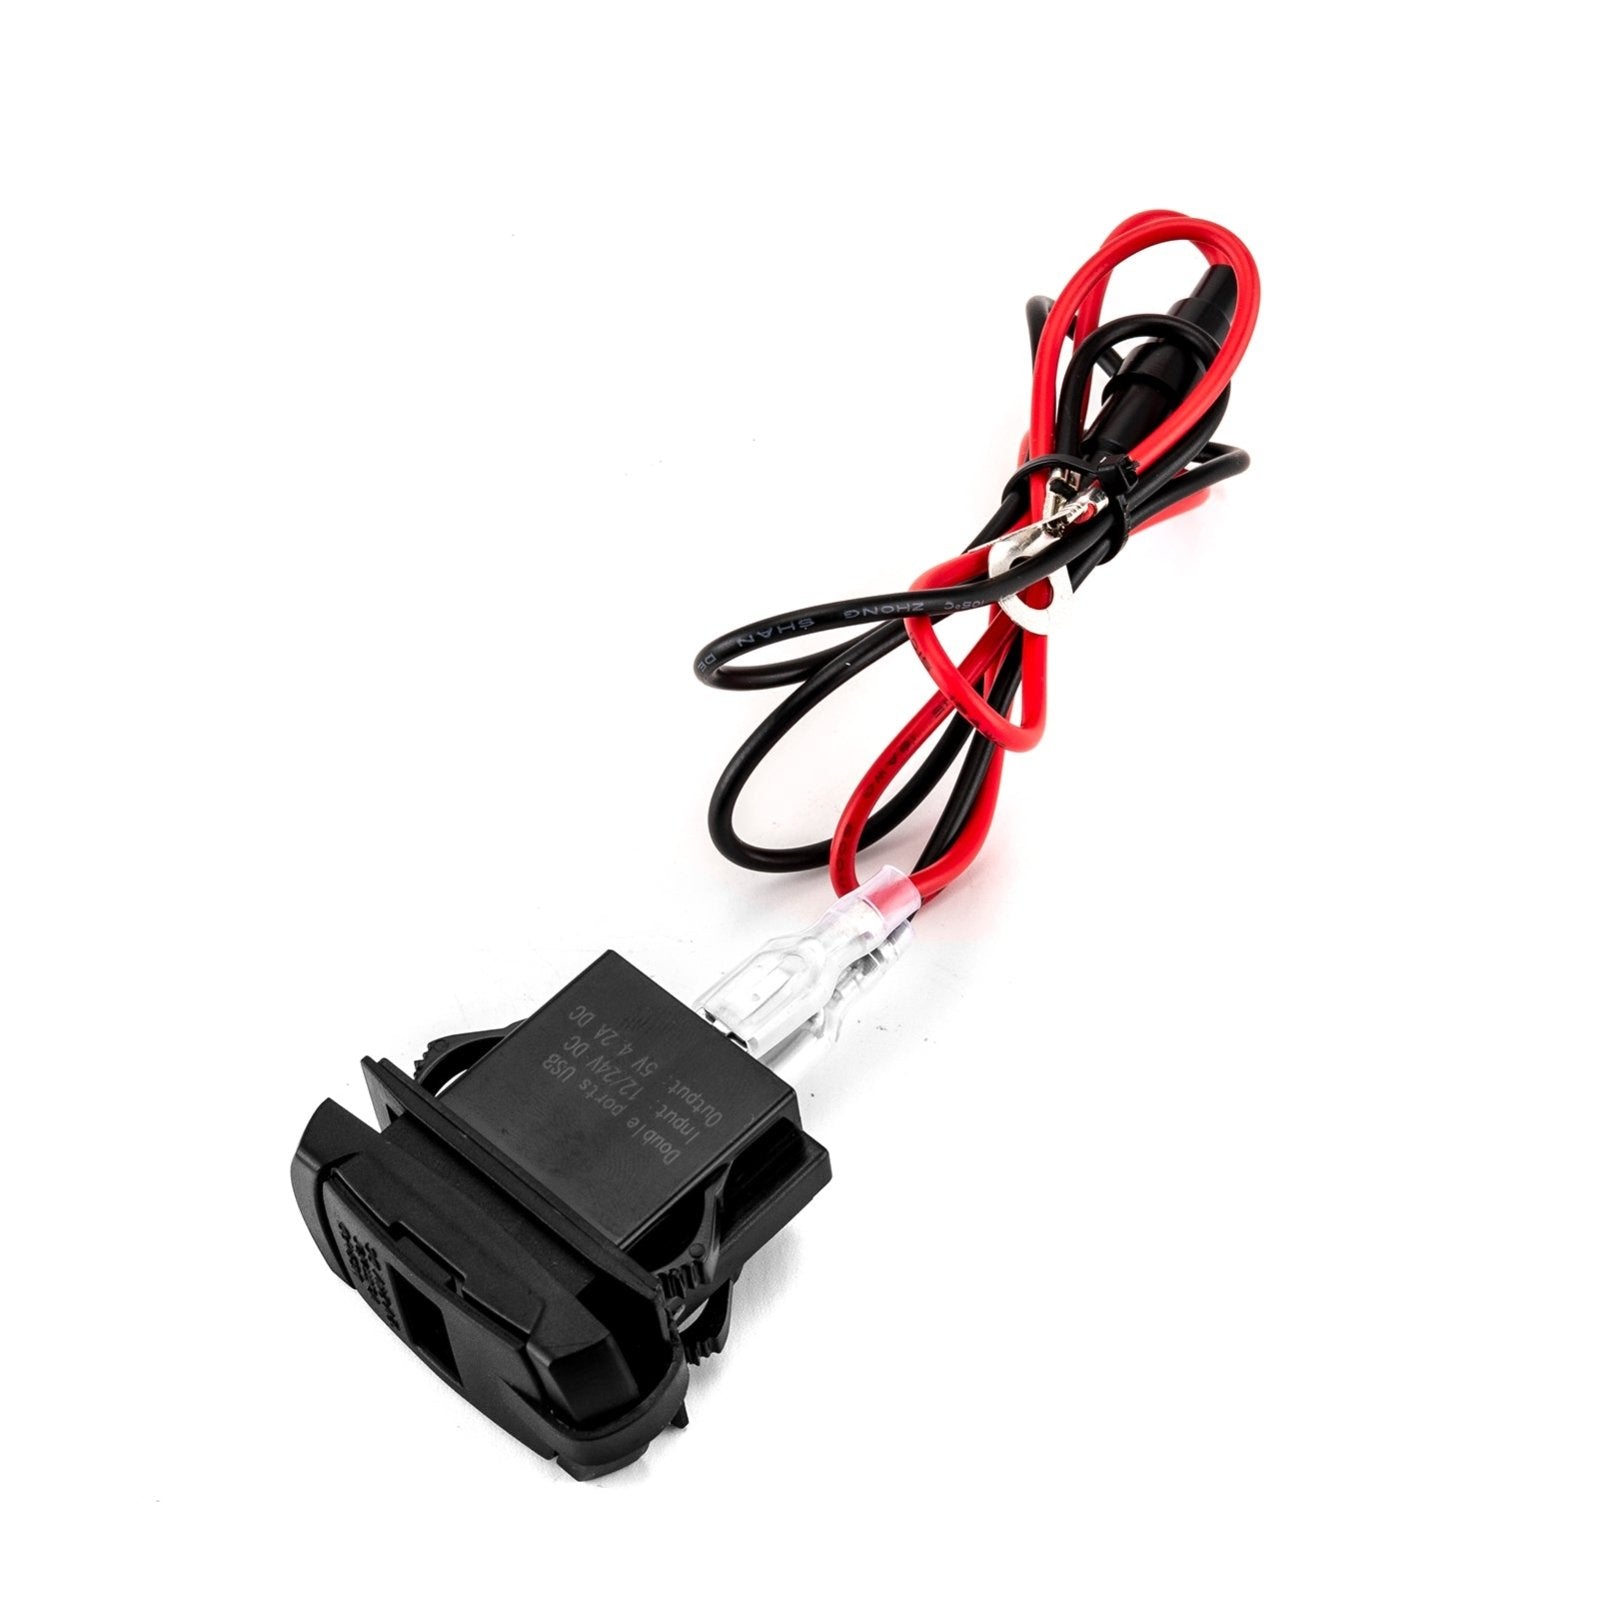 UTVs ATVs SUVs Trucks Boats USB Rocker Switch 12v Dual Charger/Outlet with LED Voltmeter Display - Weisen